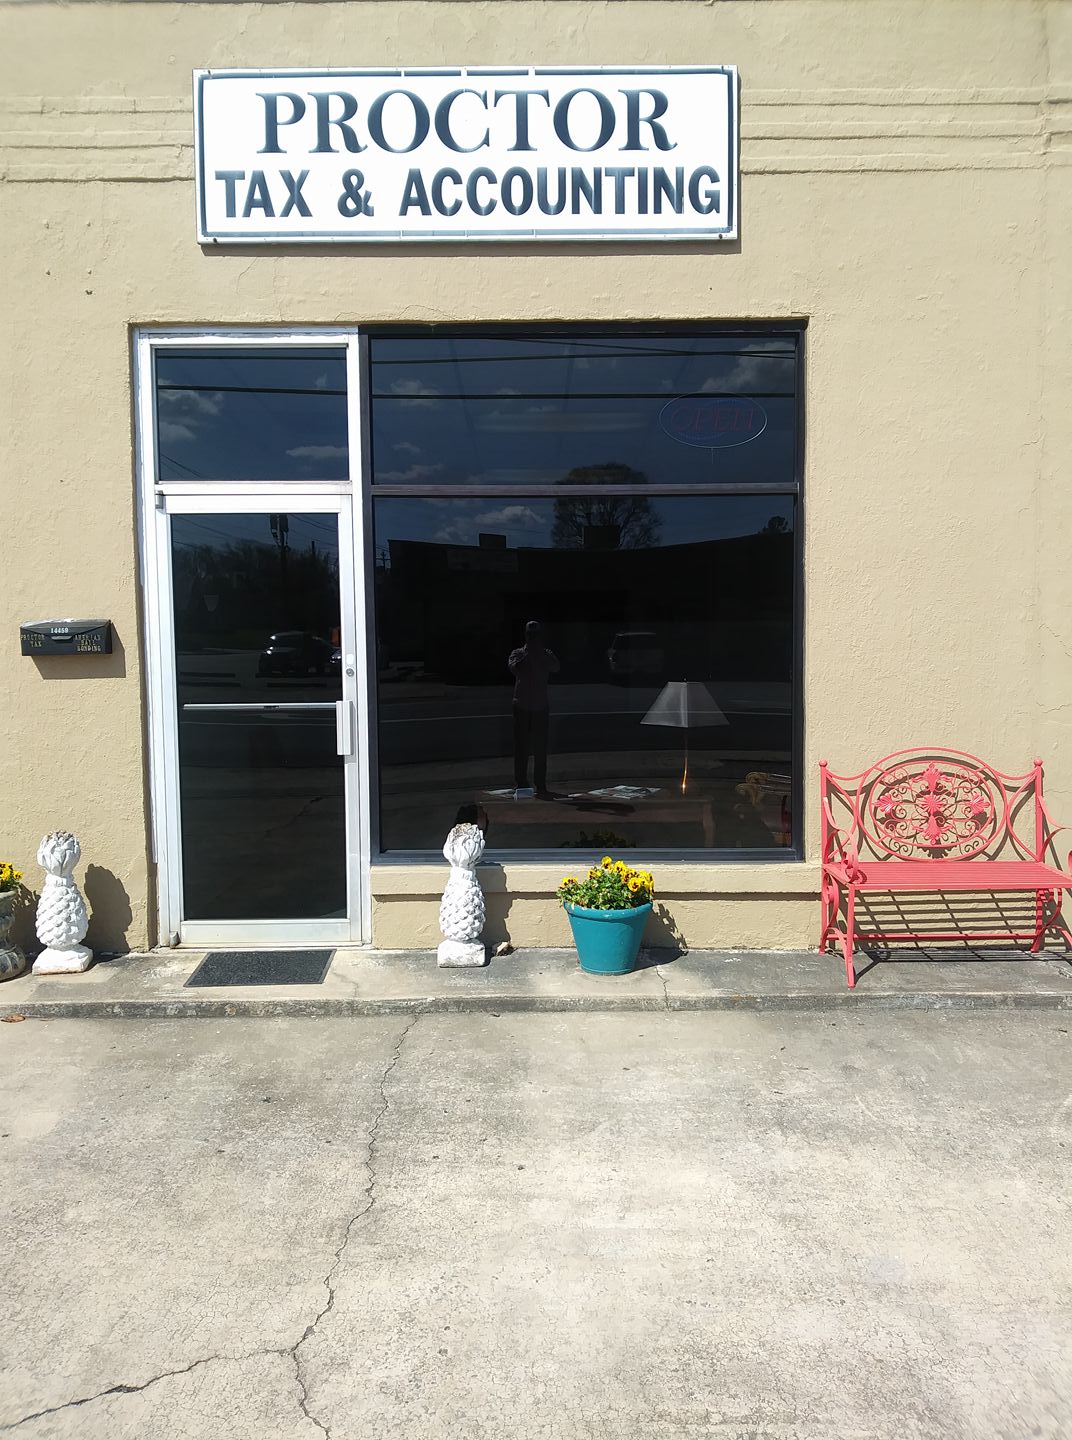 Proctor Tax & Accounting Services